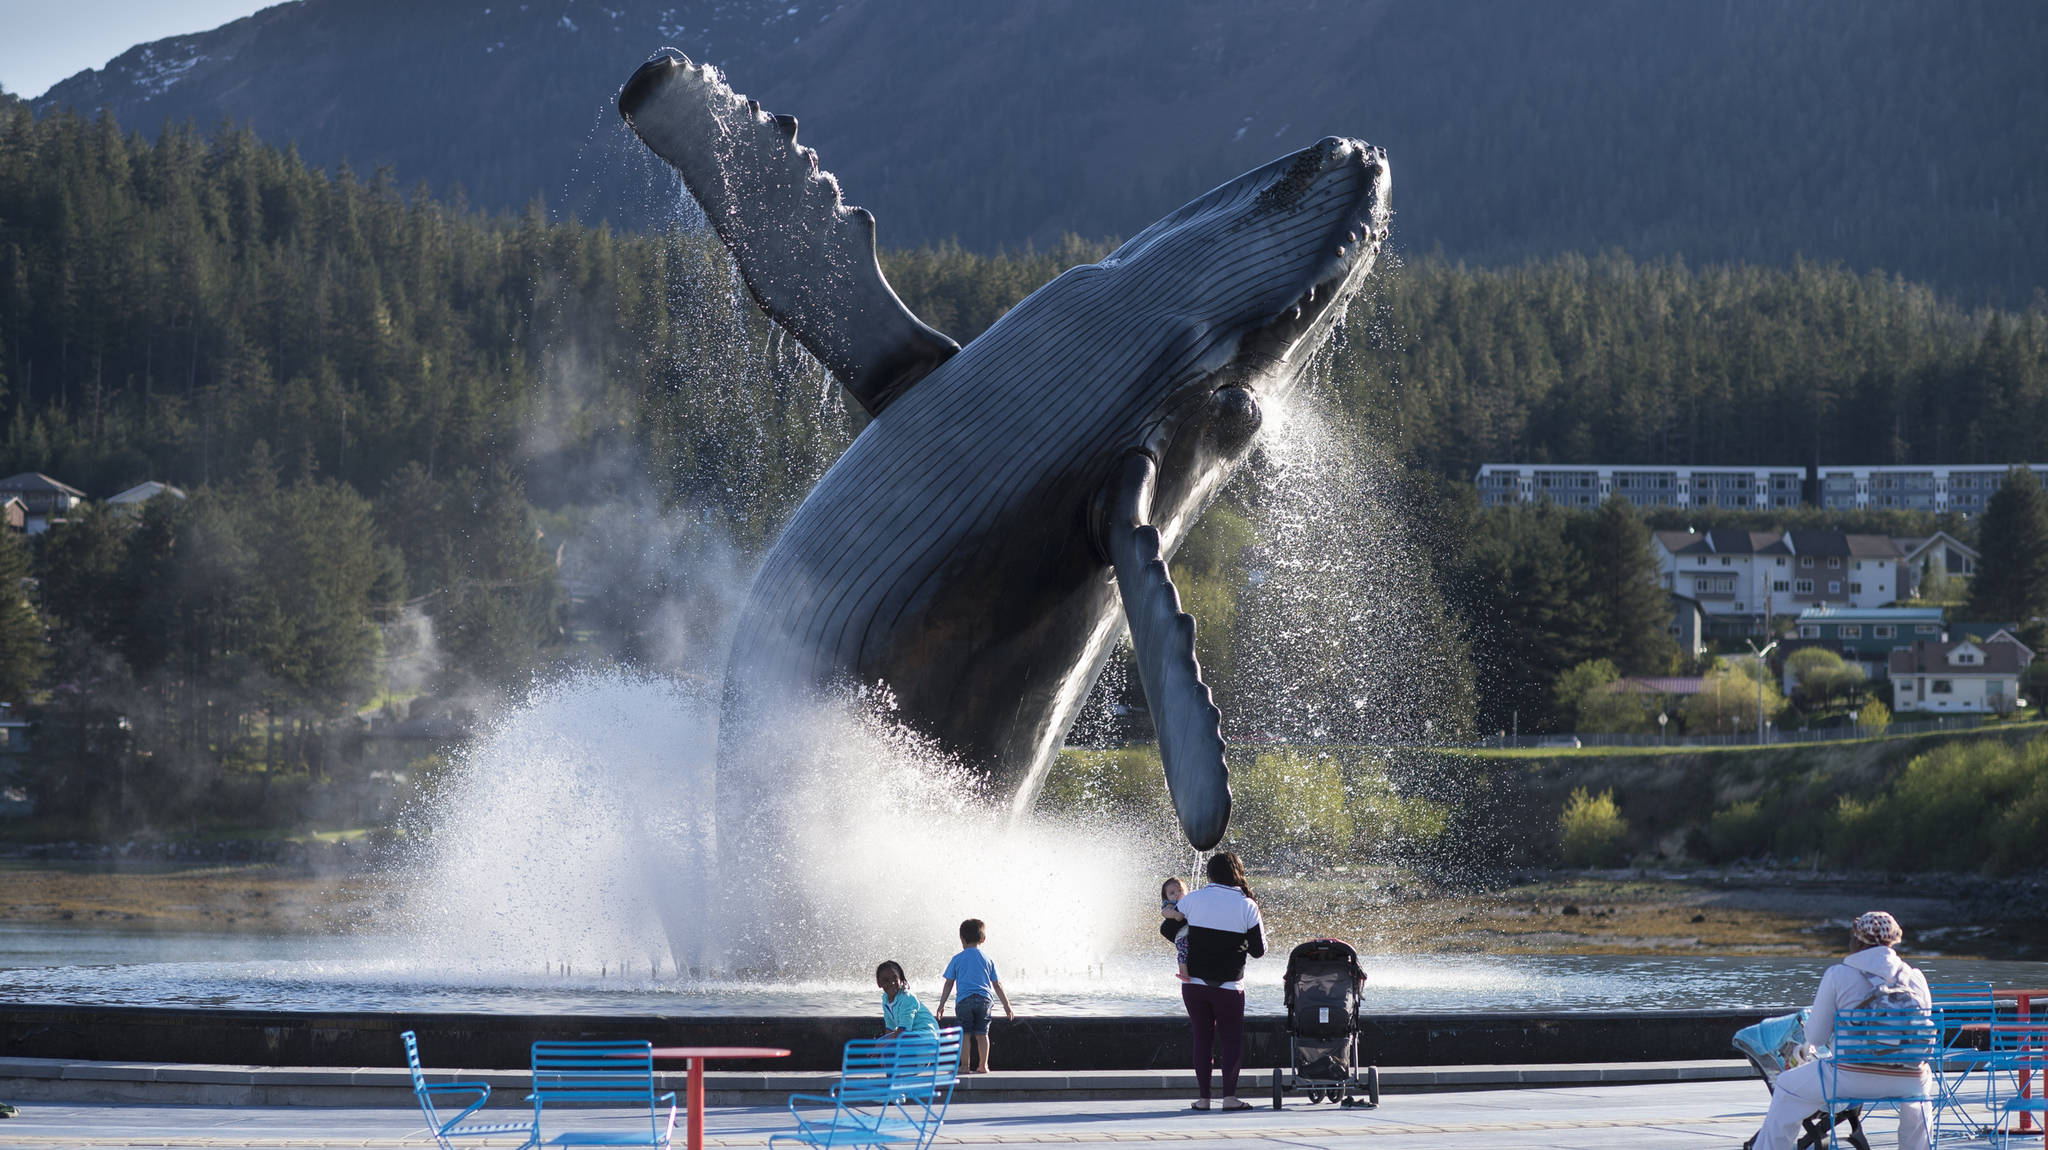 Juneau residents turn out to watch the whale fountain in action on Tuesday, May 15, 2018. (Michael Penn | Juneau Empire)